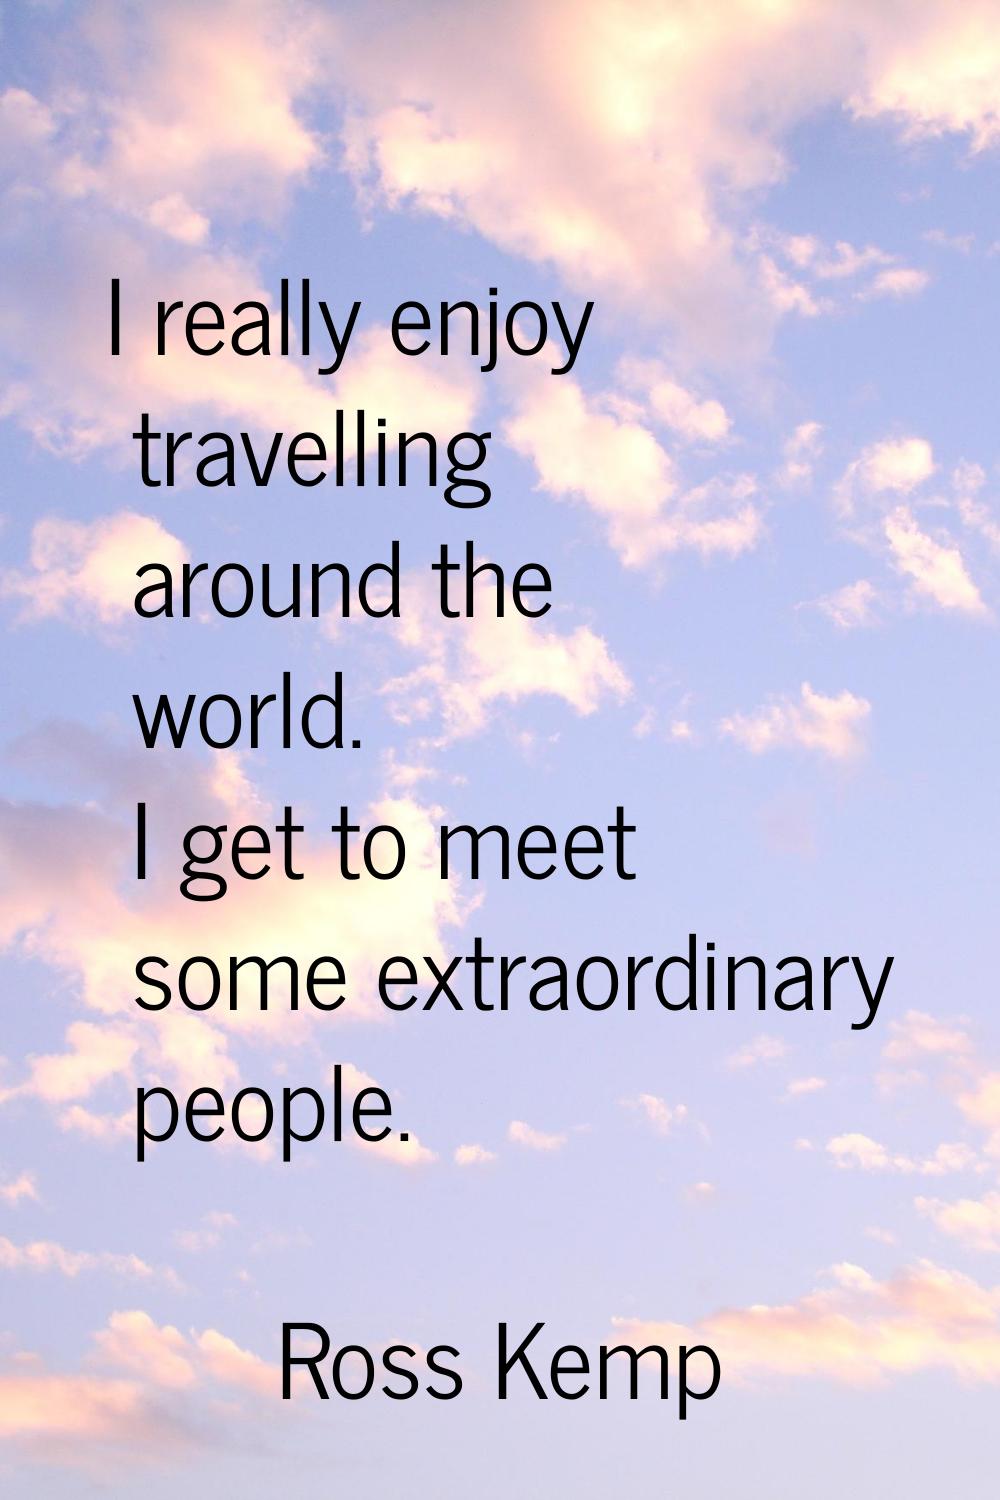 I really enjoy travelling around the world. I get to meet some extraordinary people.